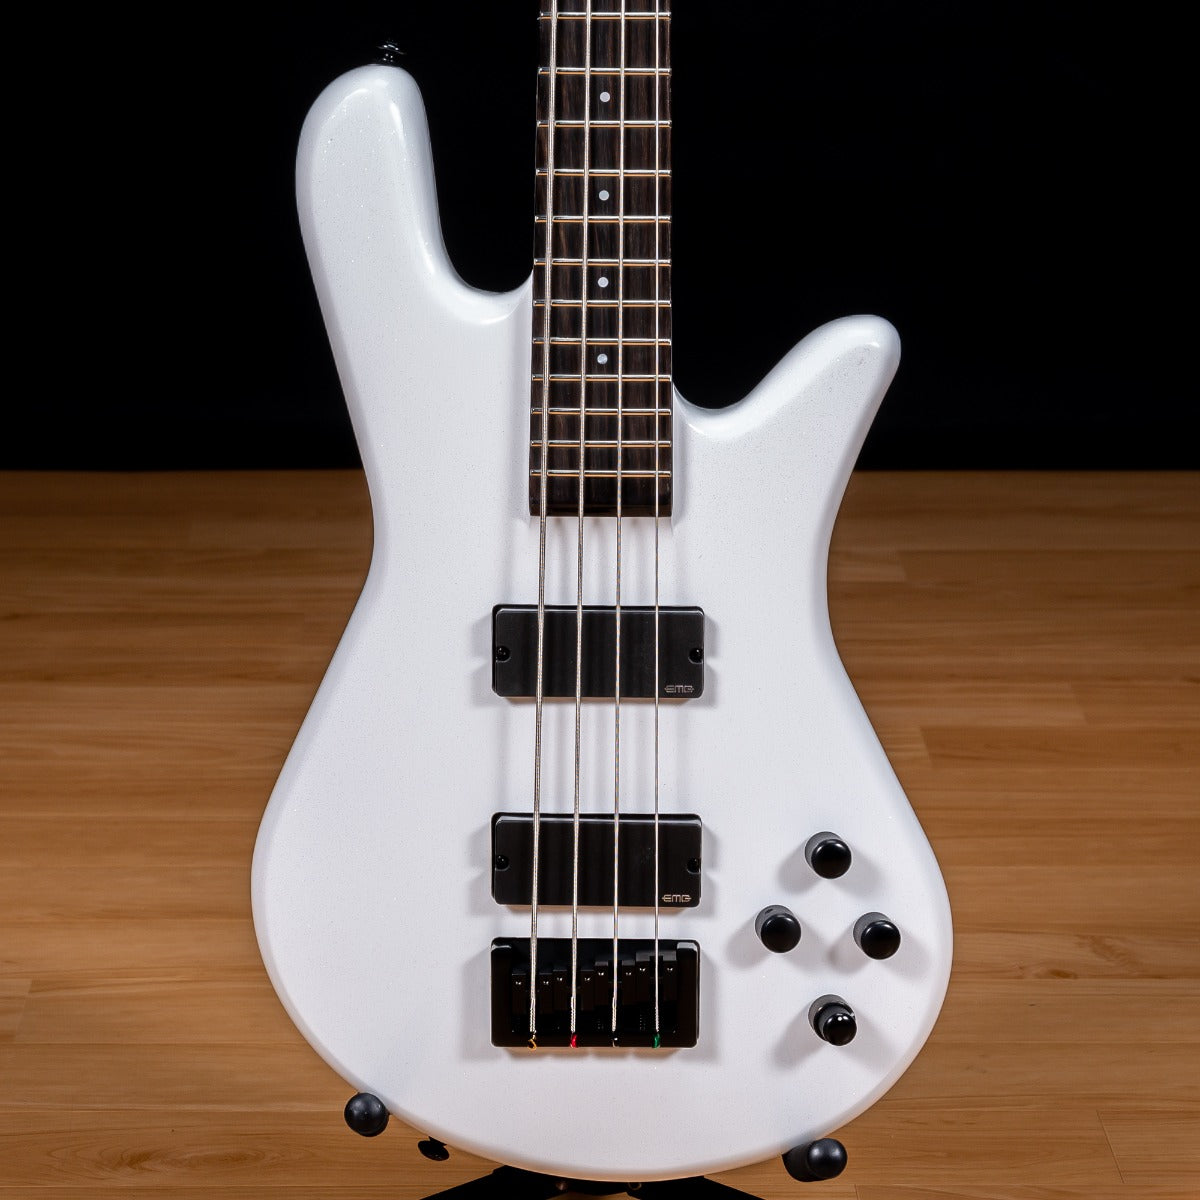 Spector NS Ethos HP 4 Bass Guitar - White Sparkle Gloss view 1